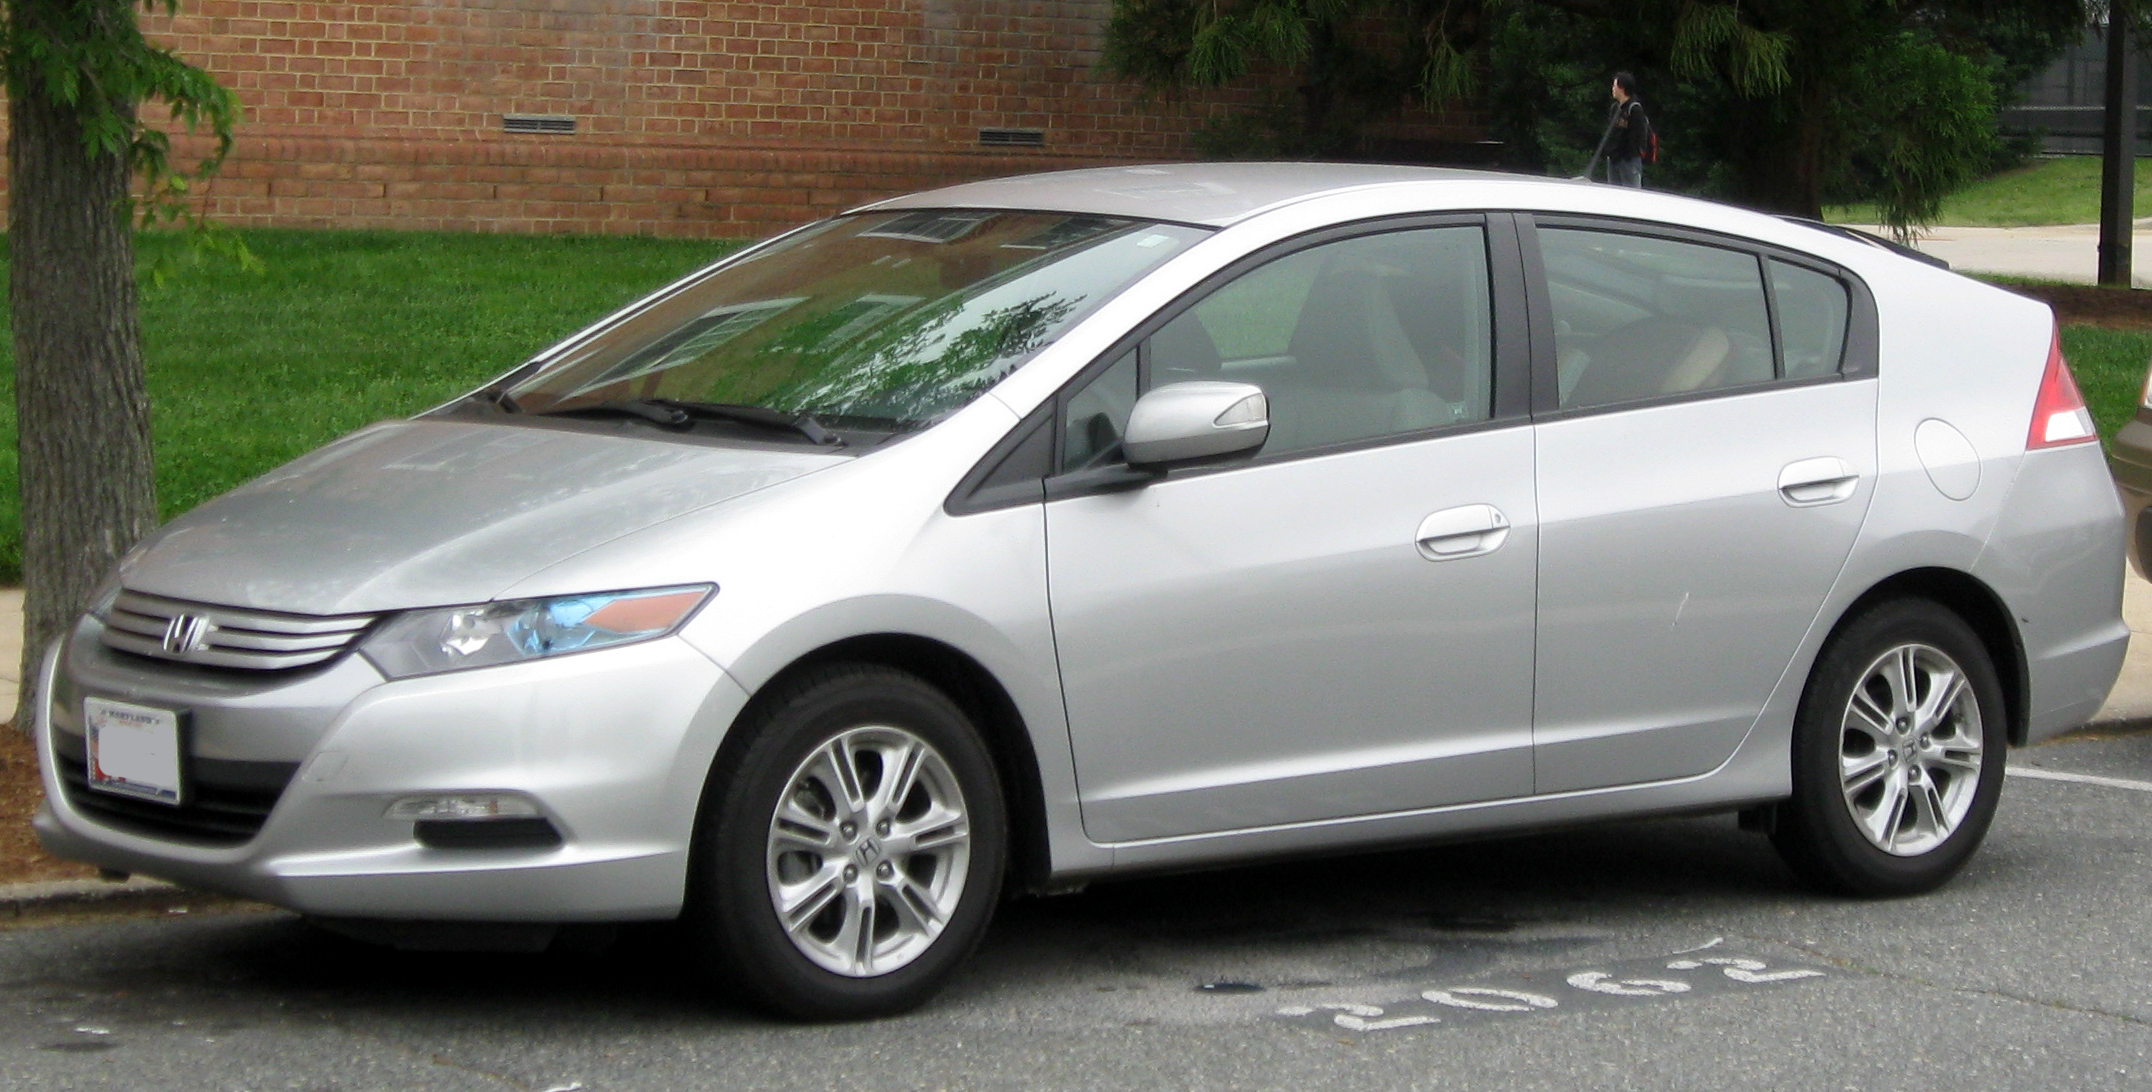 Honda Insight Price in Pakistan, Pictures and Reviews | PakWheels